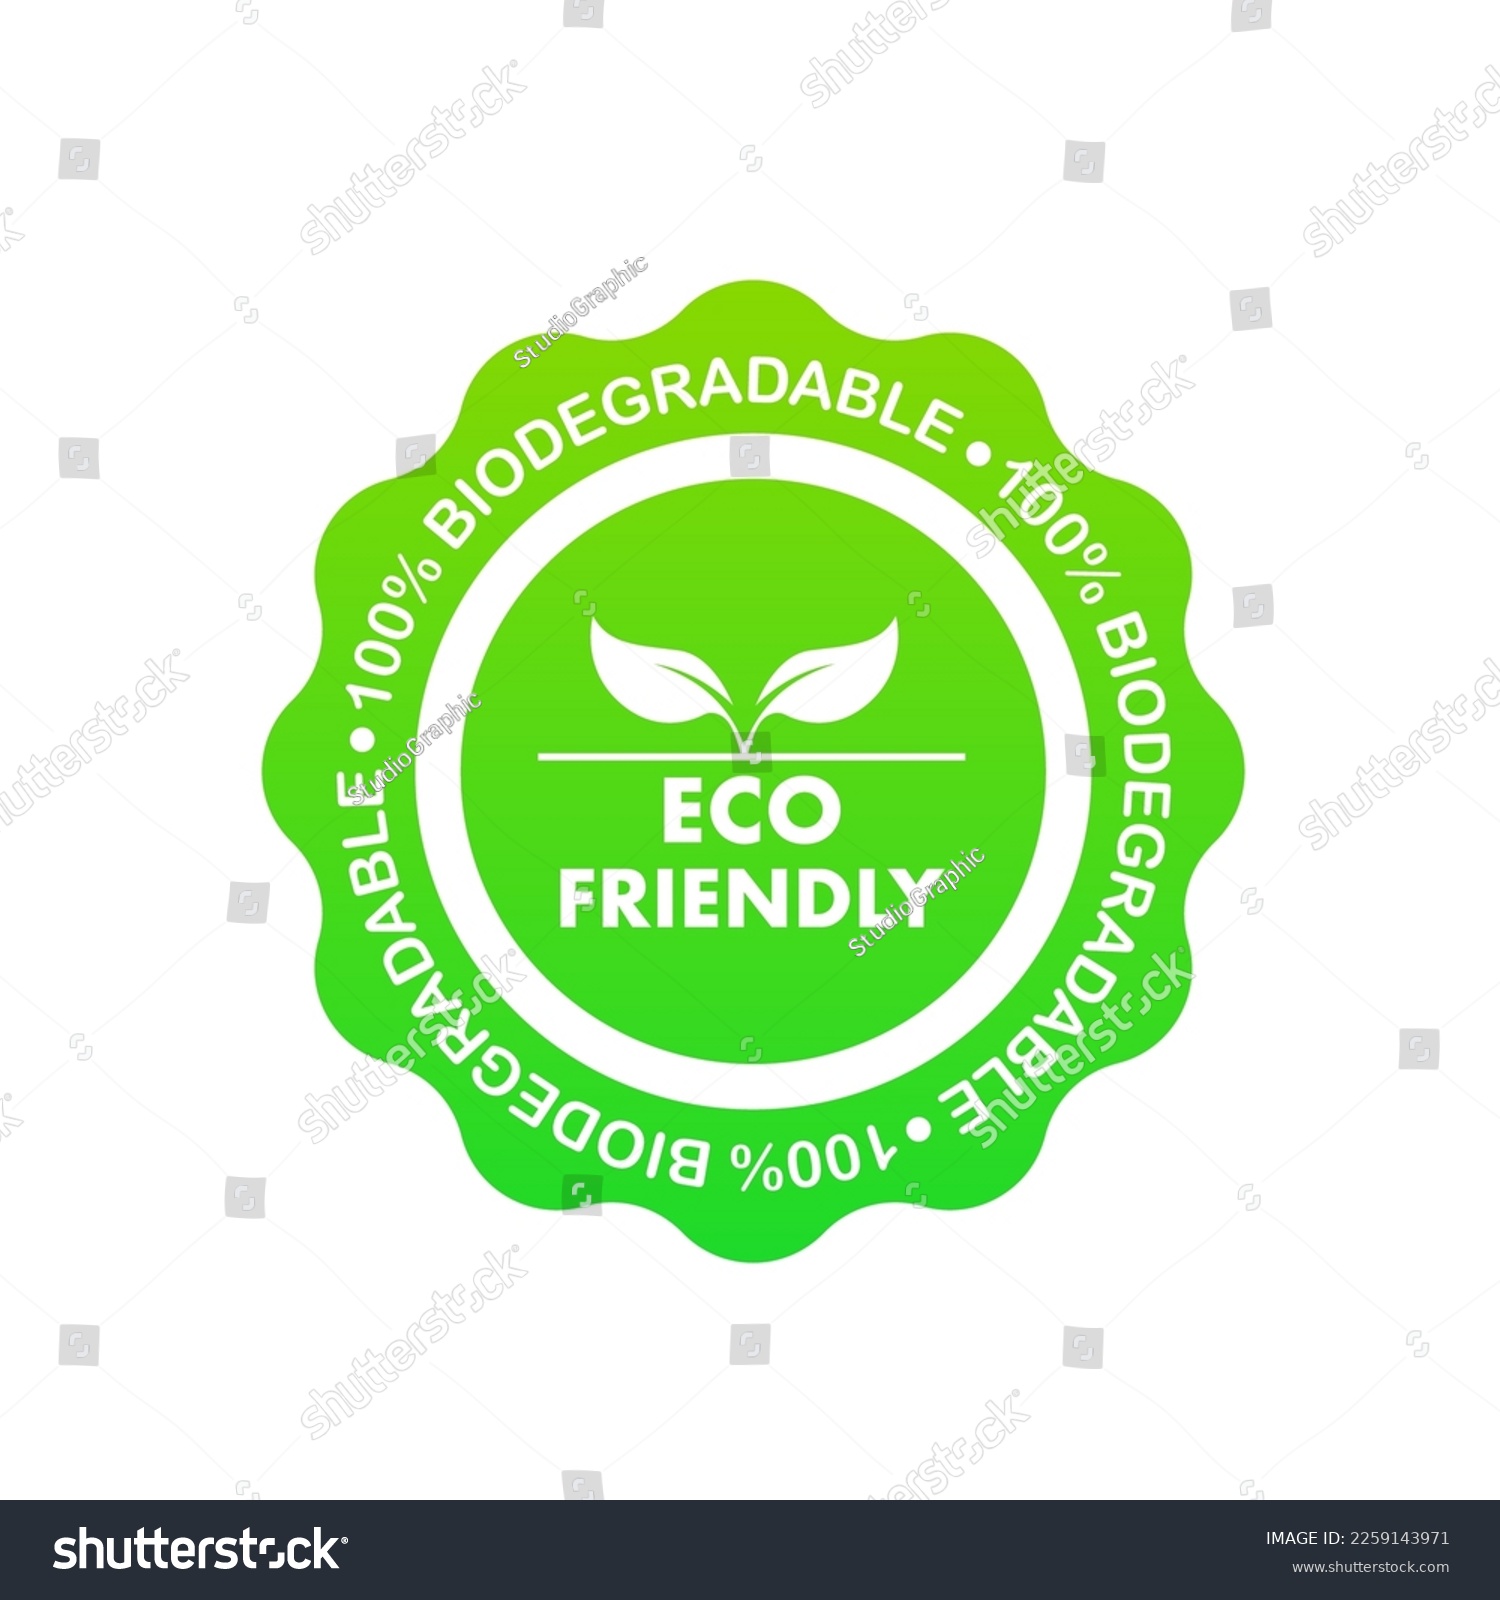 SVG of Label Eco friendly. 100% biodegradable 100% compostable icon, logo. Green leaves in a circle. Round biodegradable symbol. Natural recyclable packaging sign. Eco friendly product. Vector illustration svg